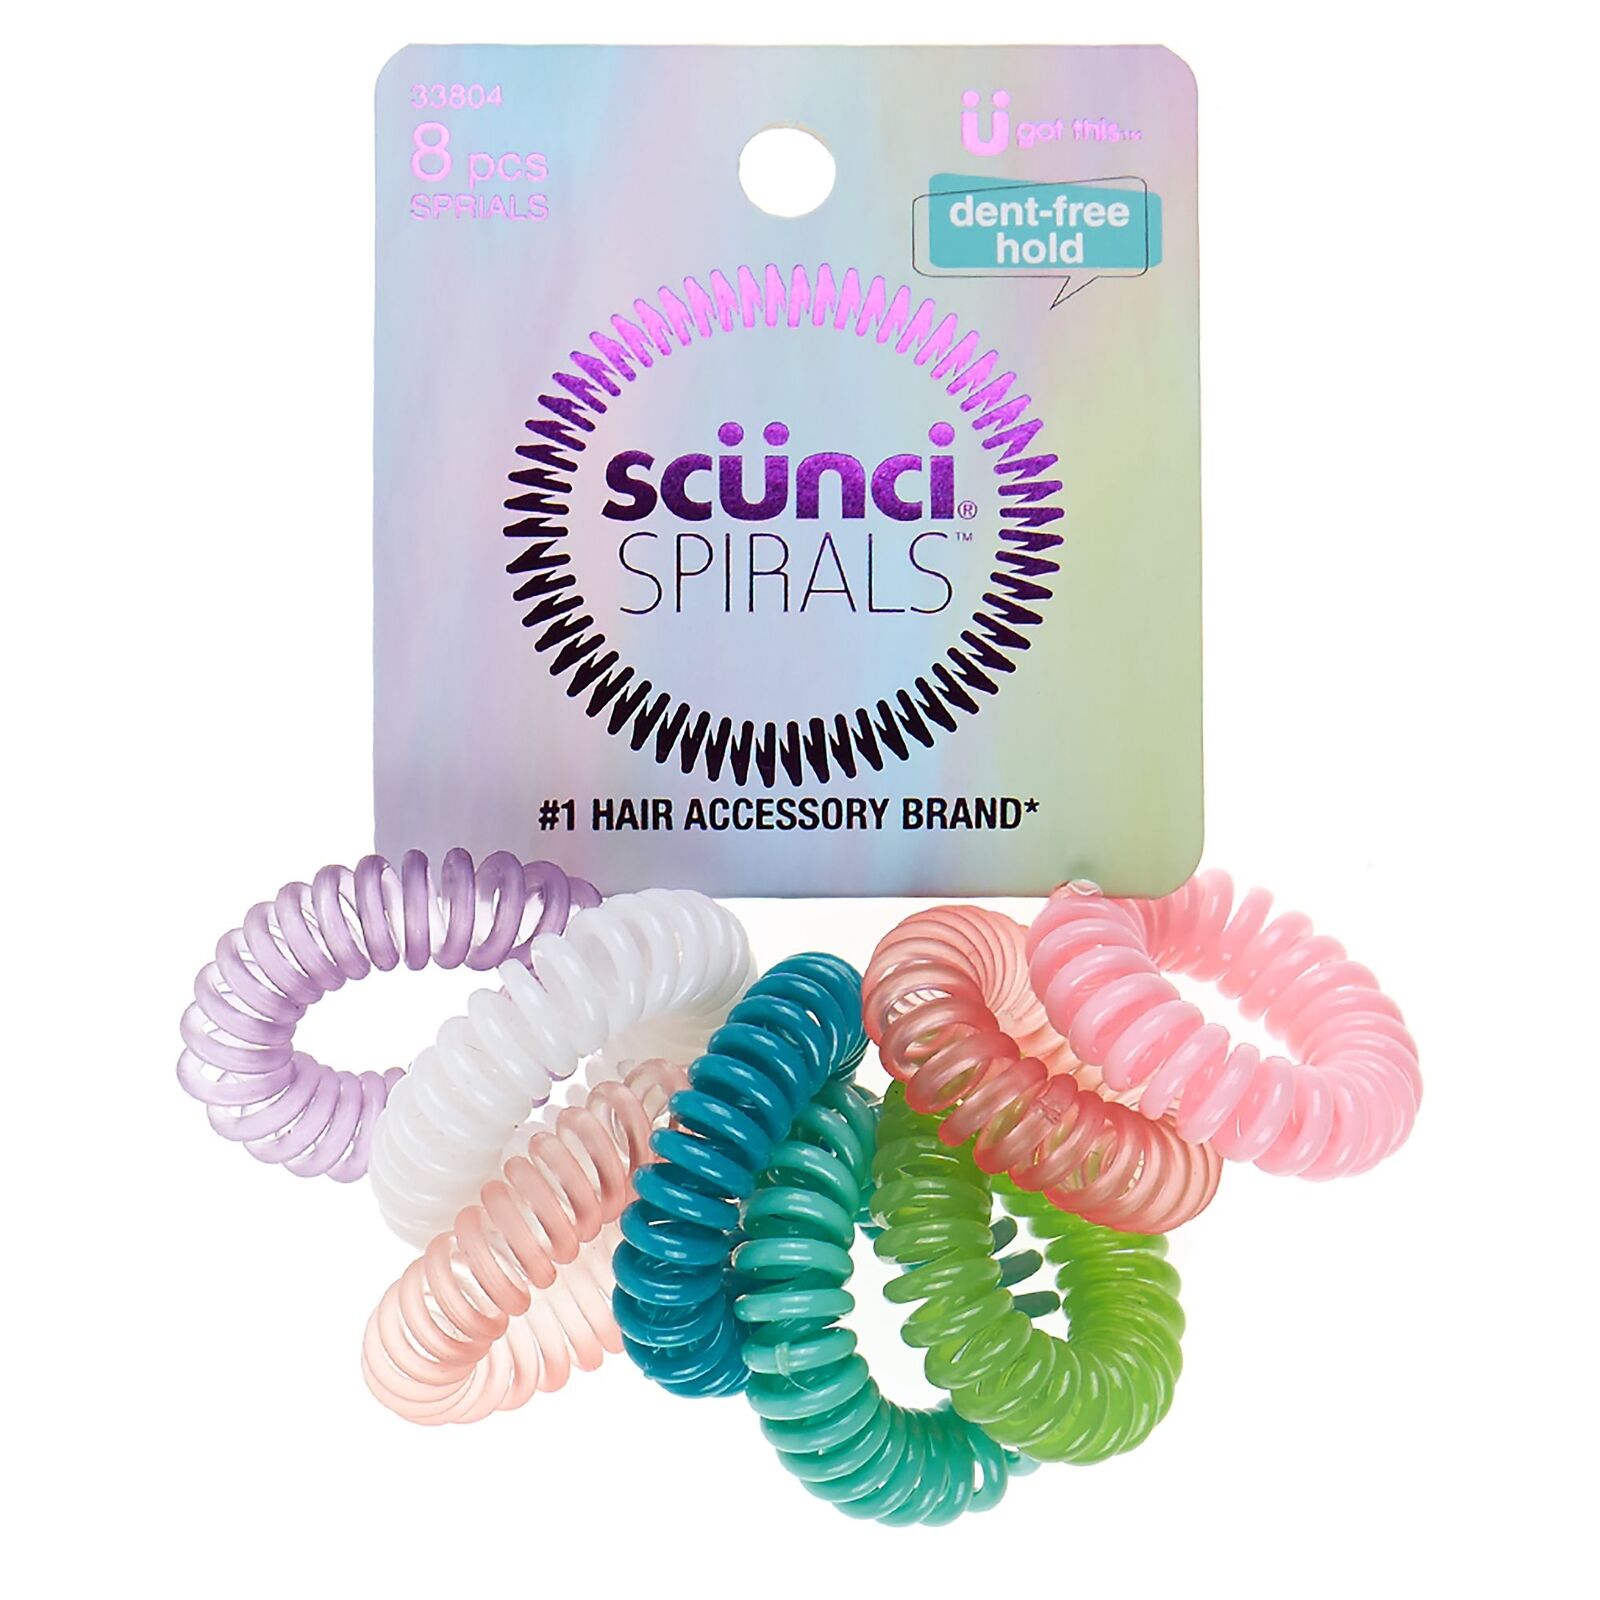 Scunci Dent-Free Hold Glitter Hair Spirals, Assorted Colors, 8-Pieces